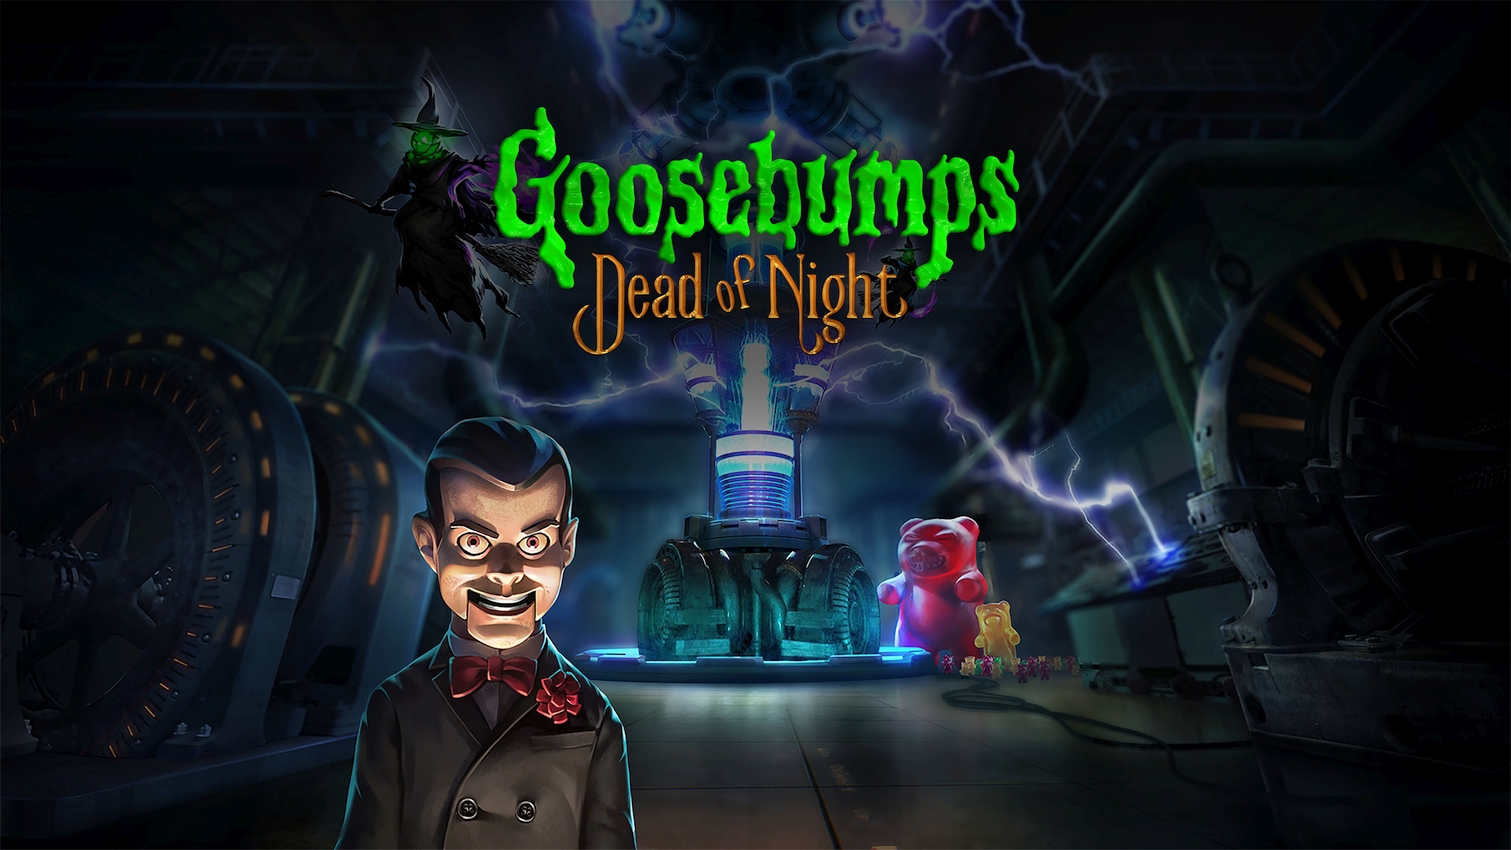 Spooky Stealth Game Goosebumps Dead of Night Launches This Summer